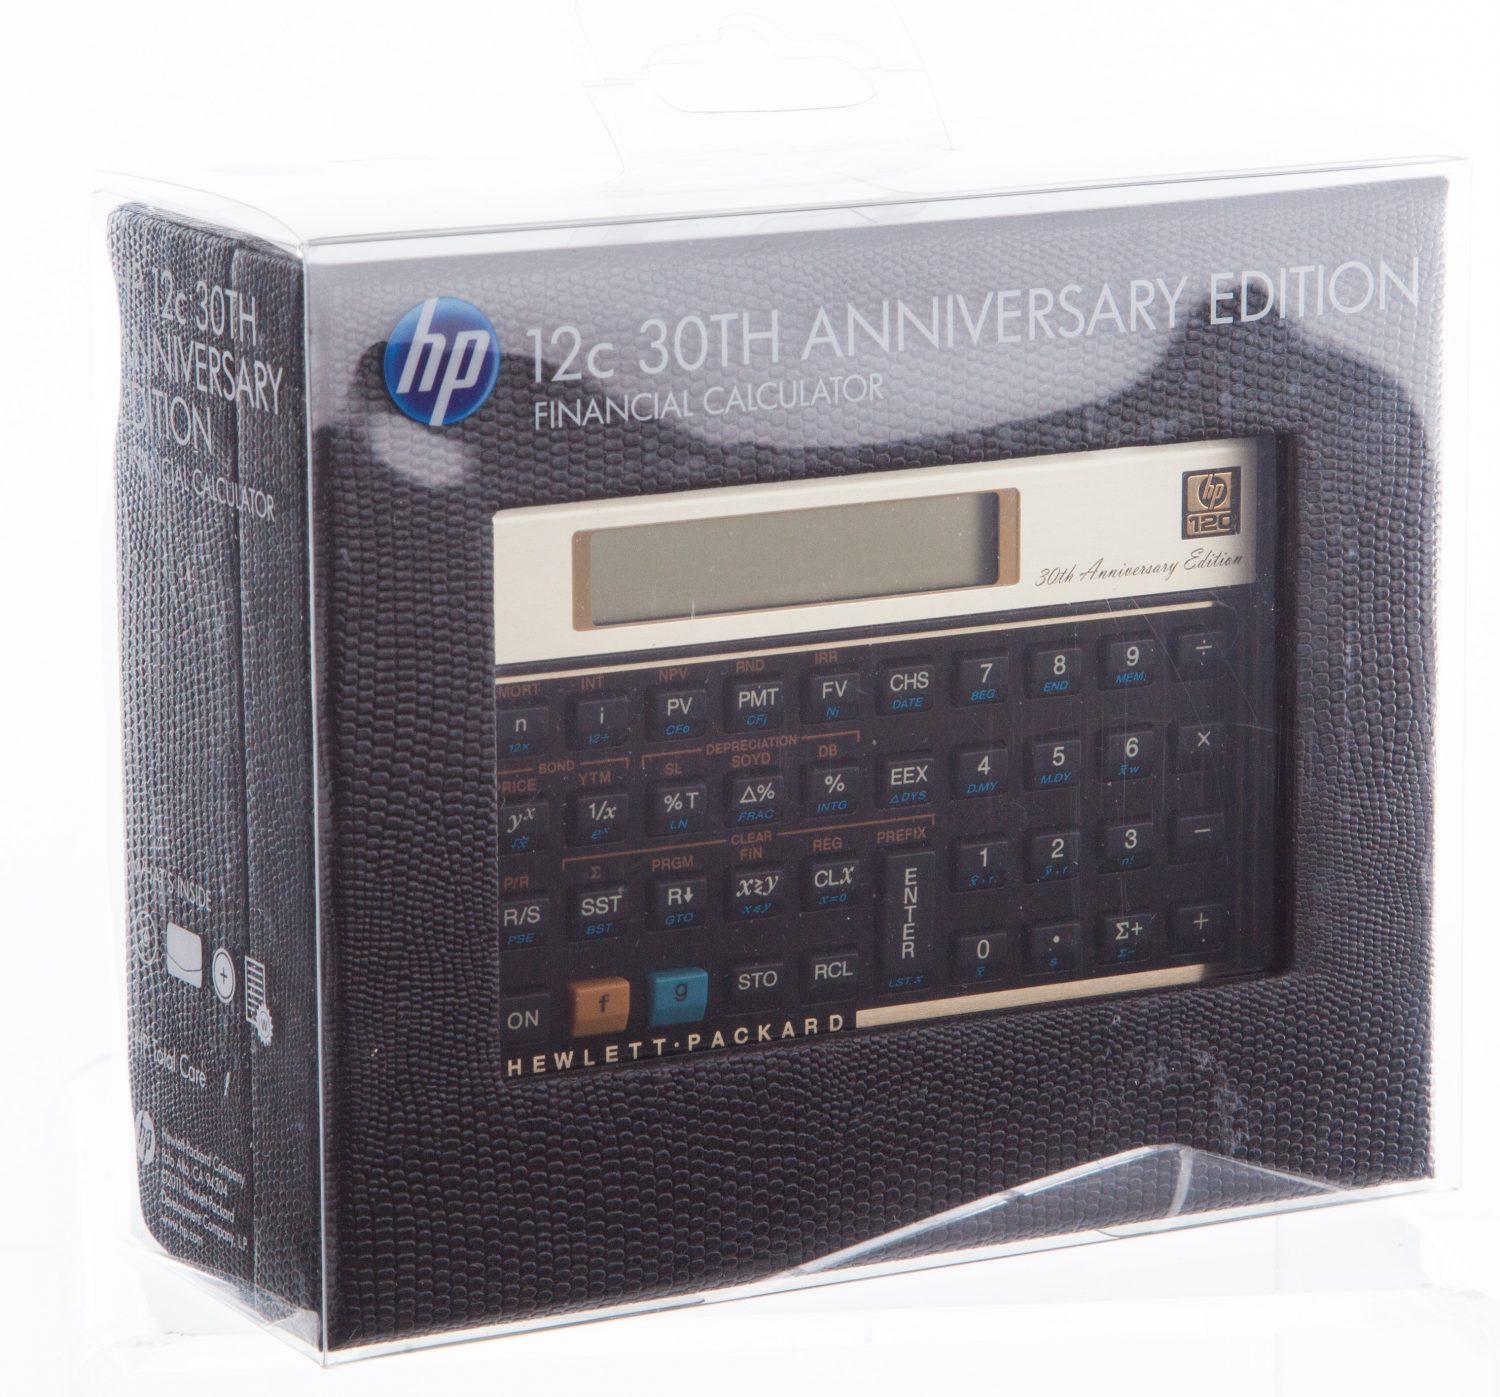 30th Anniversary Edition of the HP 12C Financial Calculator in its packaging.